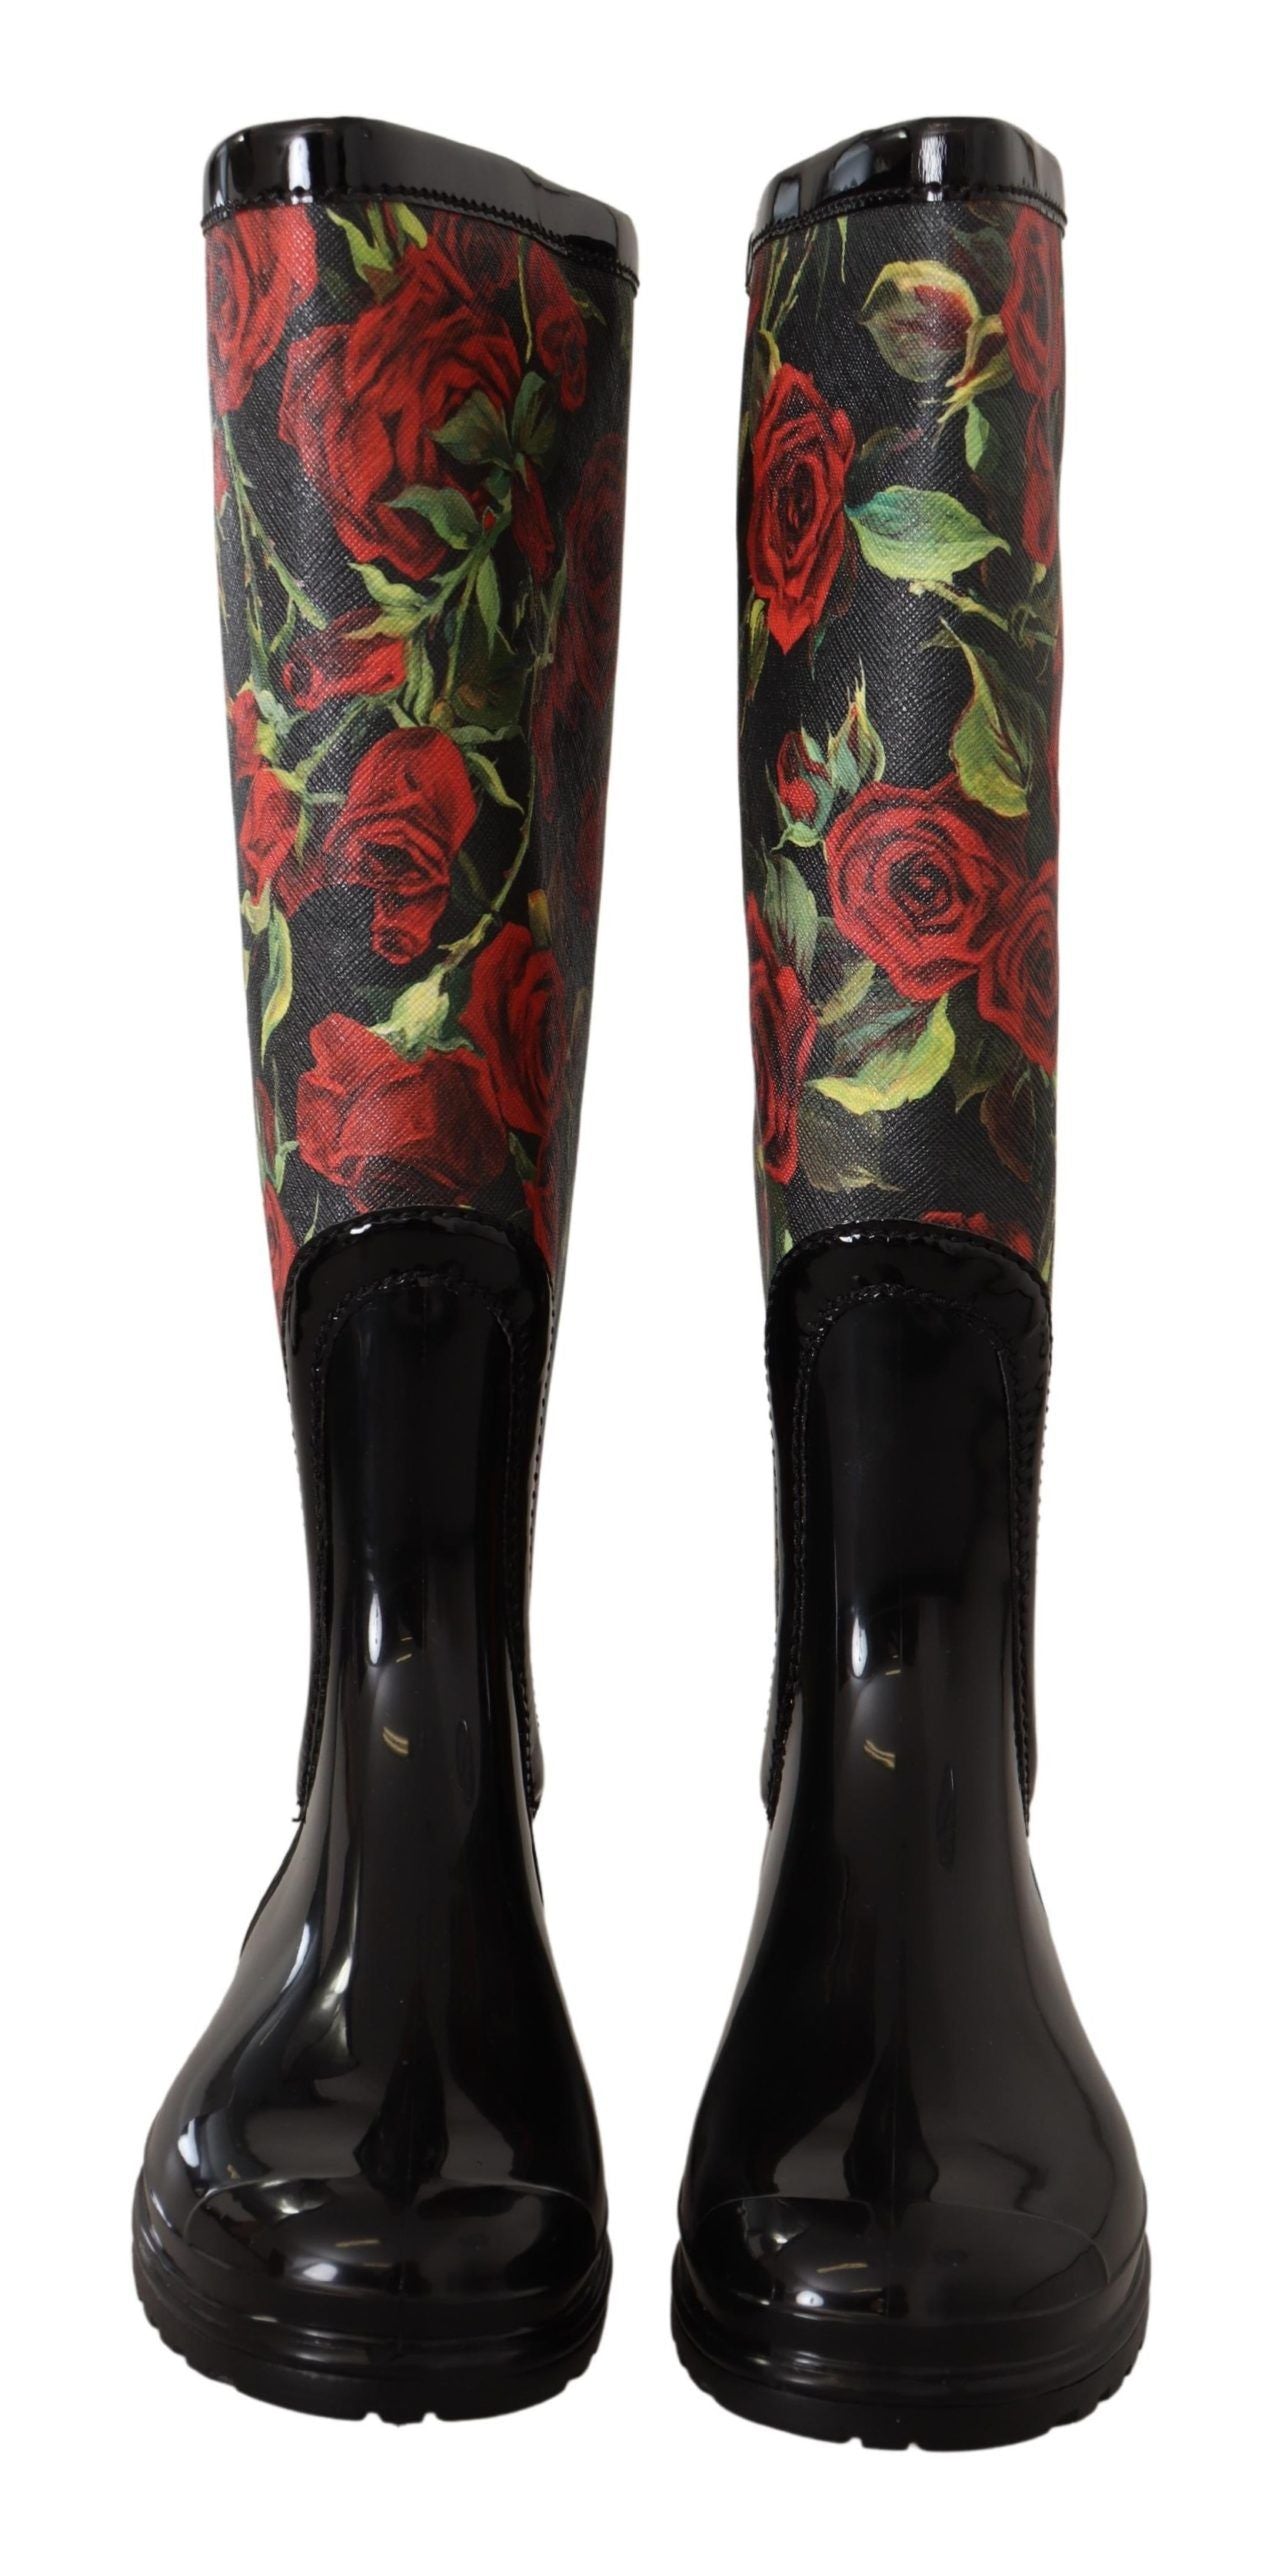 Elegant Floral Rain Boots - Chic All-Weather Footwear